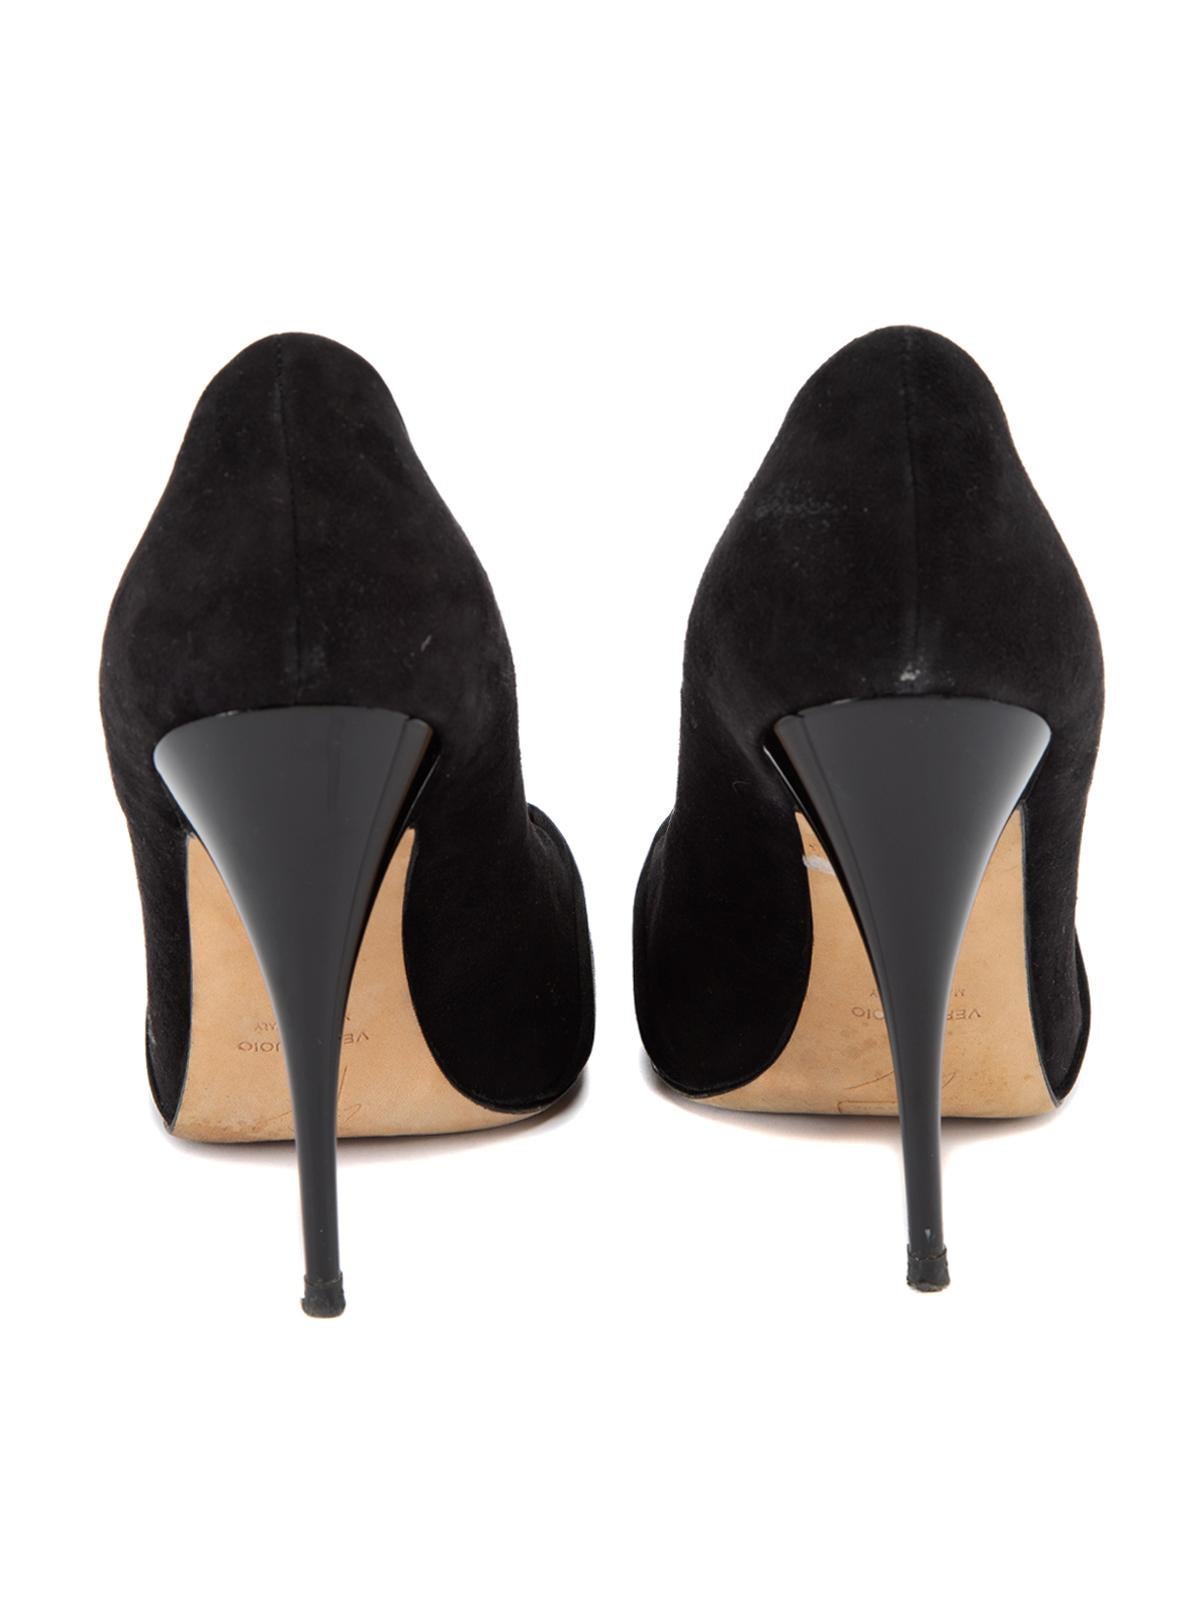 Pre-Loved Giuseppe Zanotti Women's Suede Black Heels with Knot Detail For Sale 1